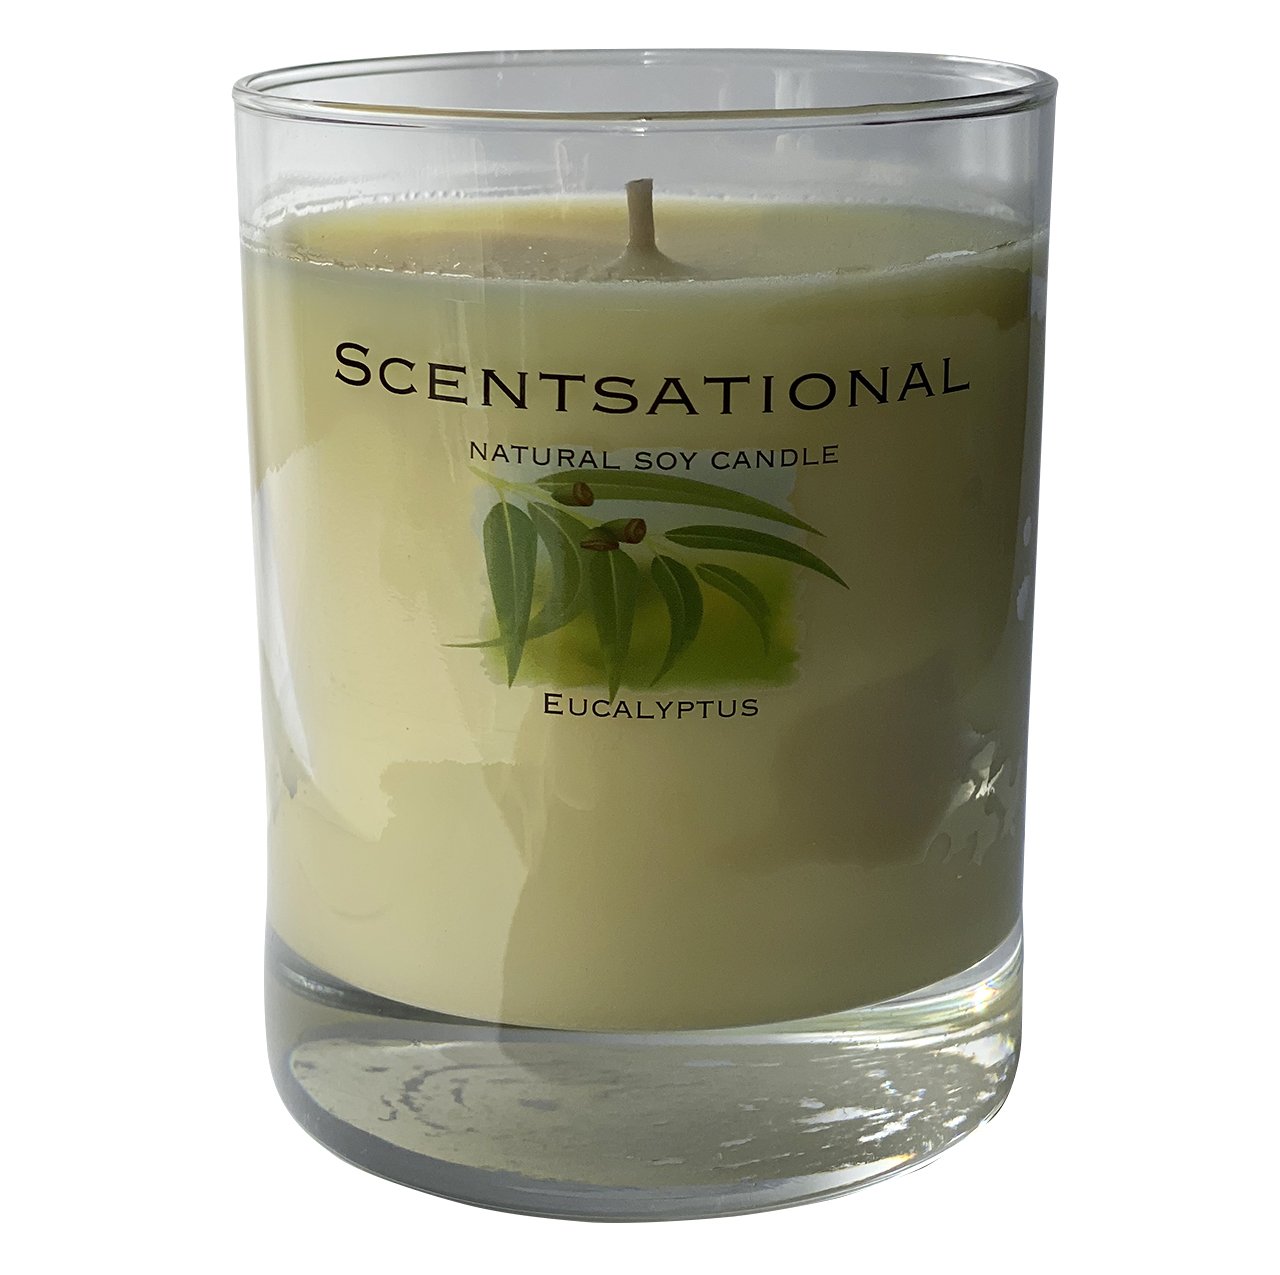 Scented Soy Candles EUCALYPTUS (11 oz) eliminates smoke, household and pet odors.